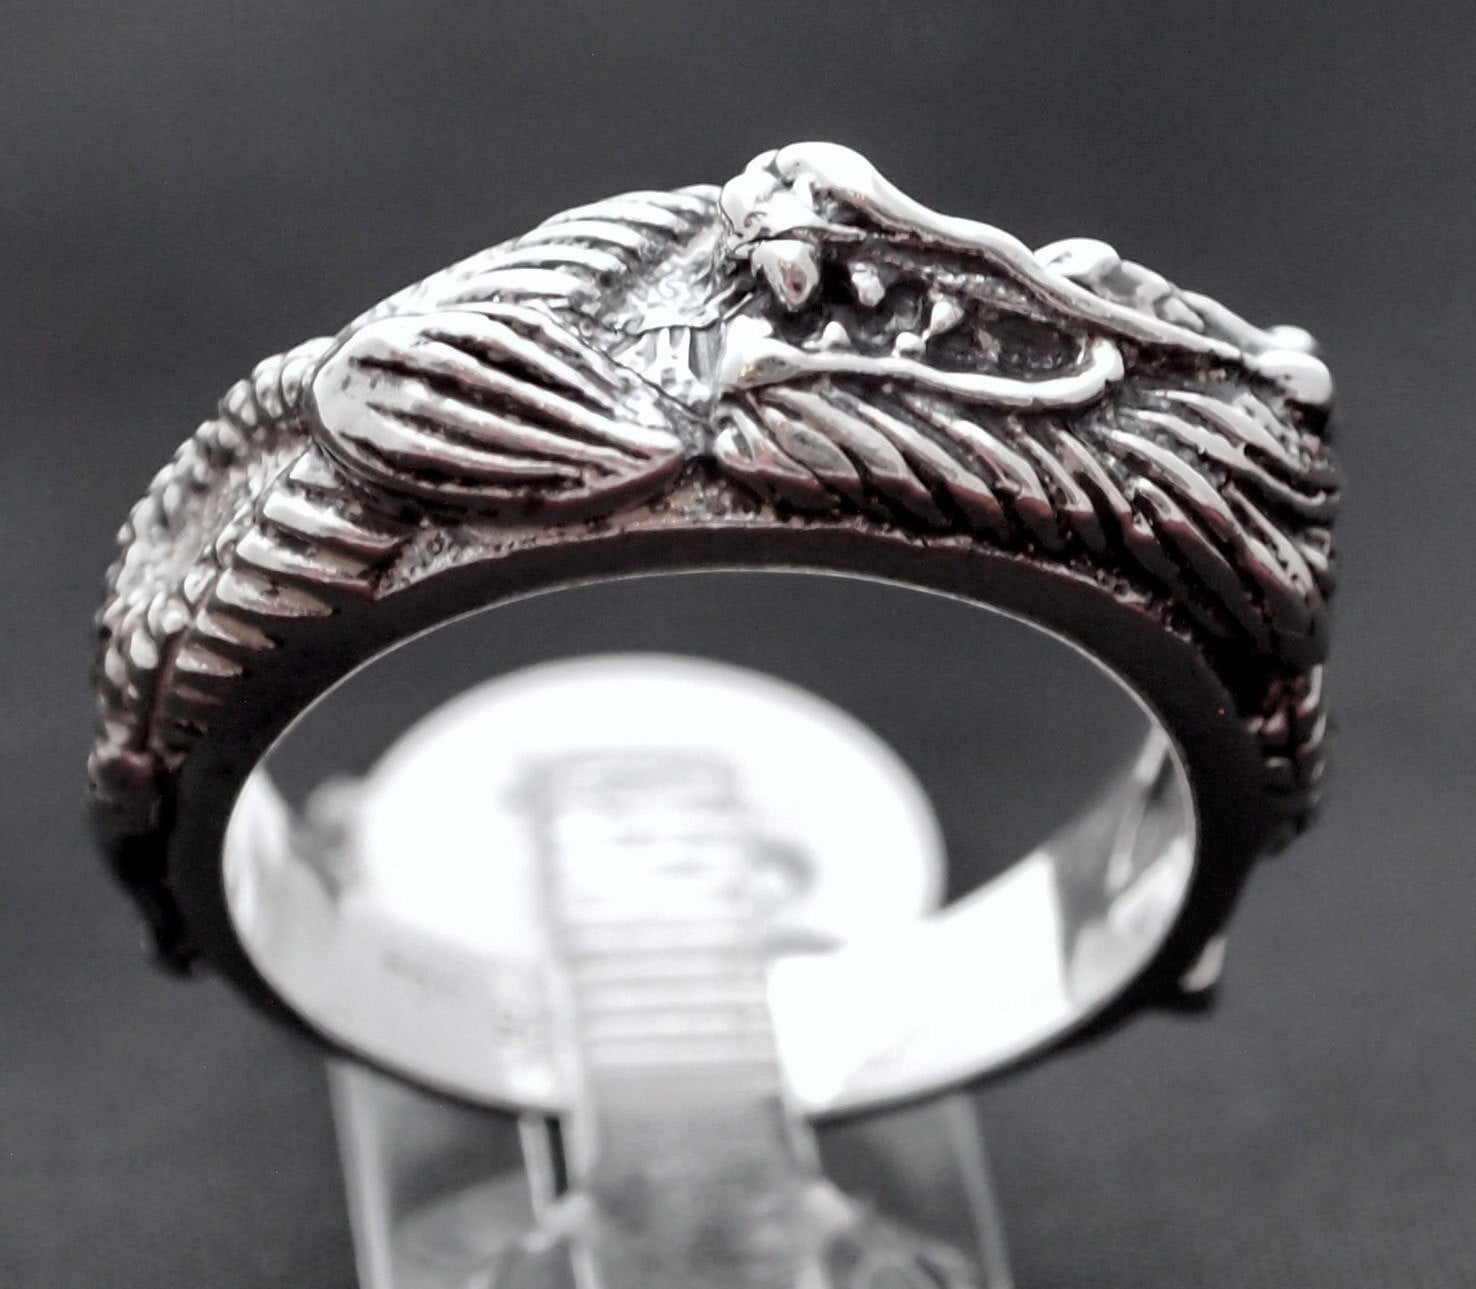 Asian Dragon Band In Sterling Silver or Antique Bronze, Silver Dragon Ring, Asian Dragon Ring, Silver Dragon Band, Here Be Dragons, Silver Fantasy Jewelry, Silver Fantasy Jewellery, 925 Silver Dragon Ring, Chinese Dragon Ring, Mens Dragon Ring, Mens Silver Dragon Ring, Mens Silver Dragon Jewelry, Mens Silver Dragon Jewellery